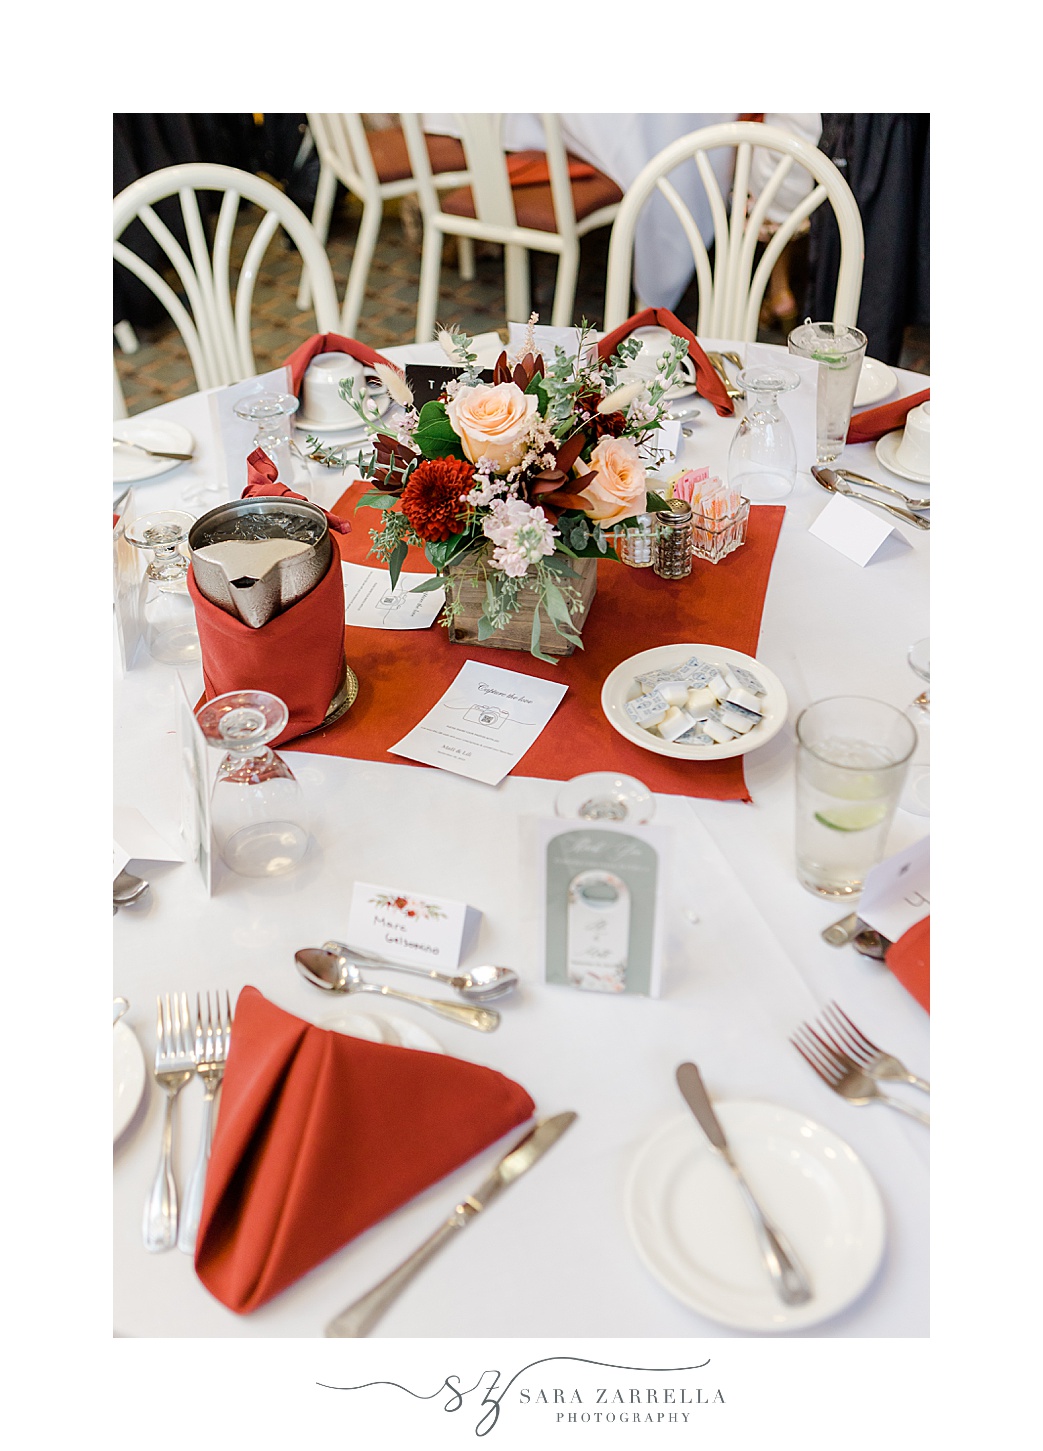 place setting at Jacky's Galaxie with red napkins and pink flowers in center of table 